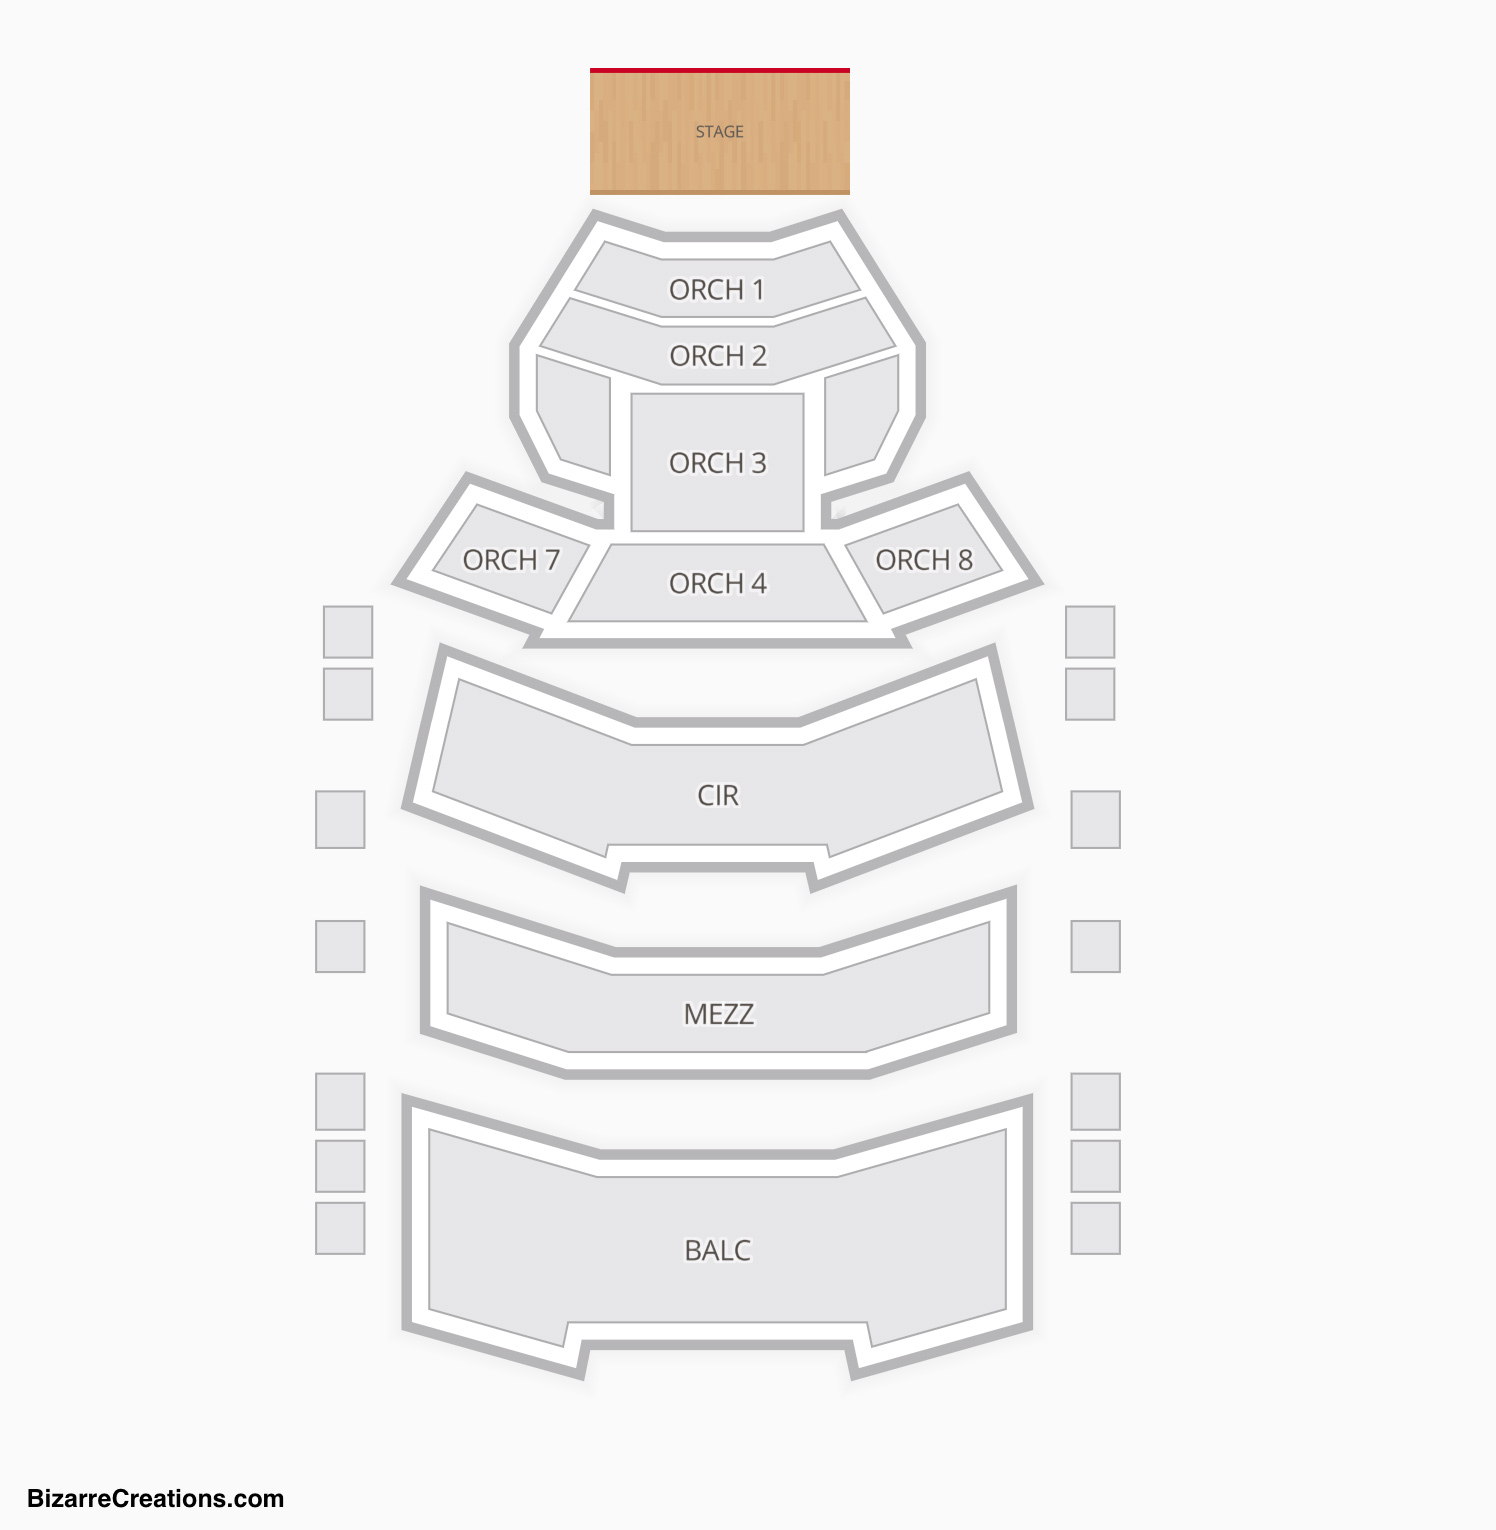 Overture Seating Chart Wi